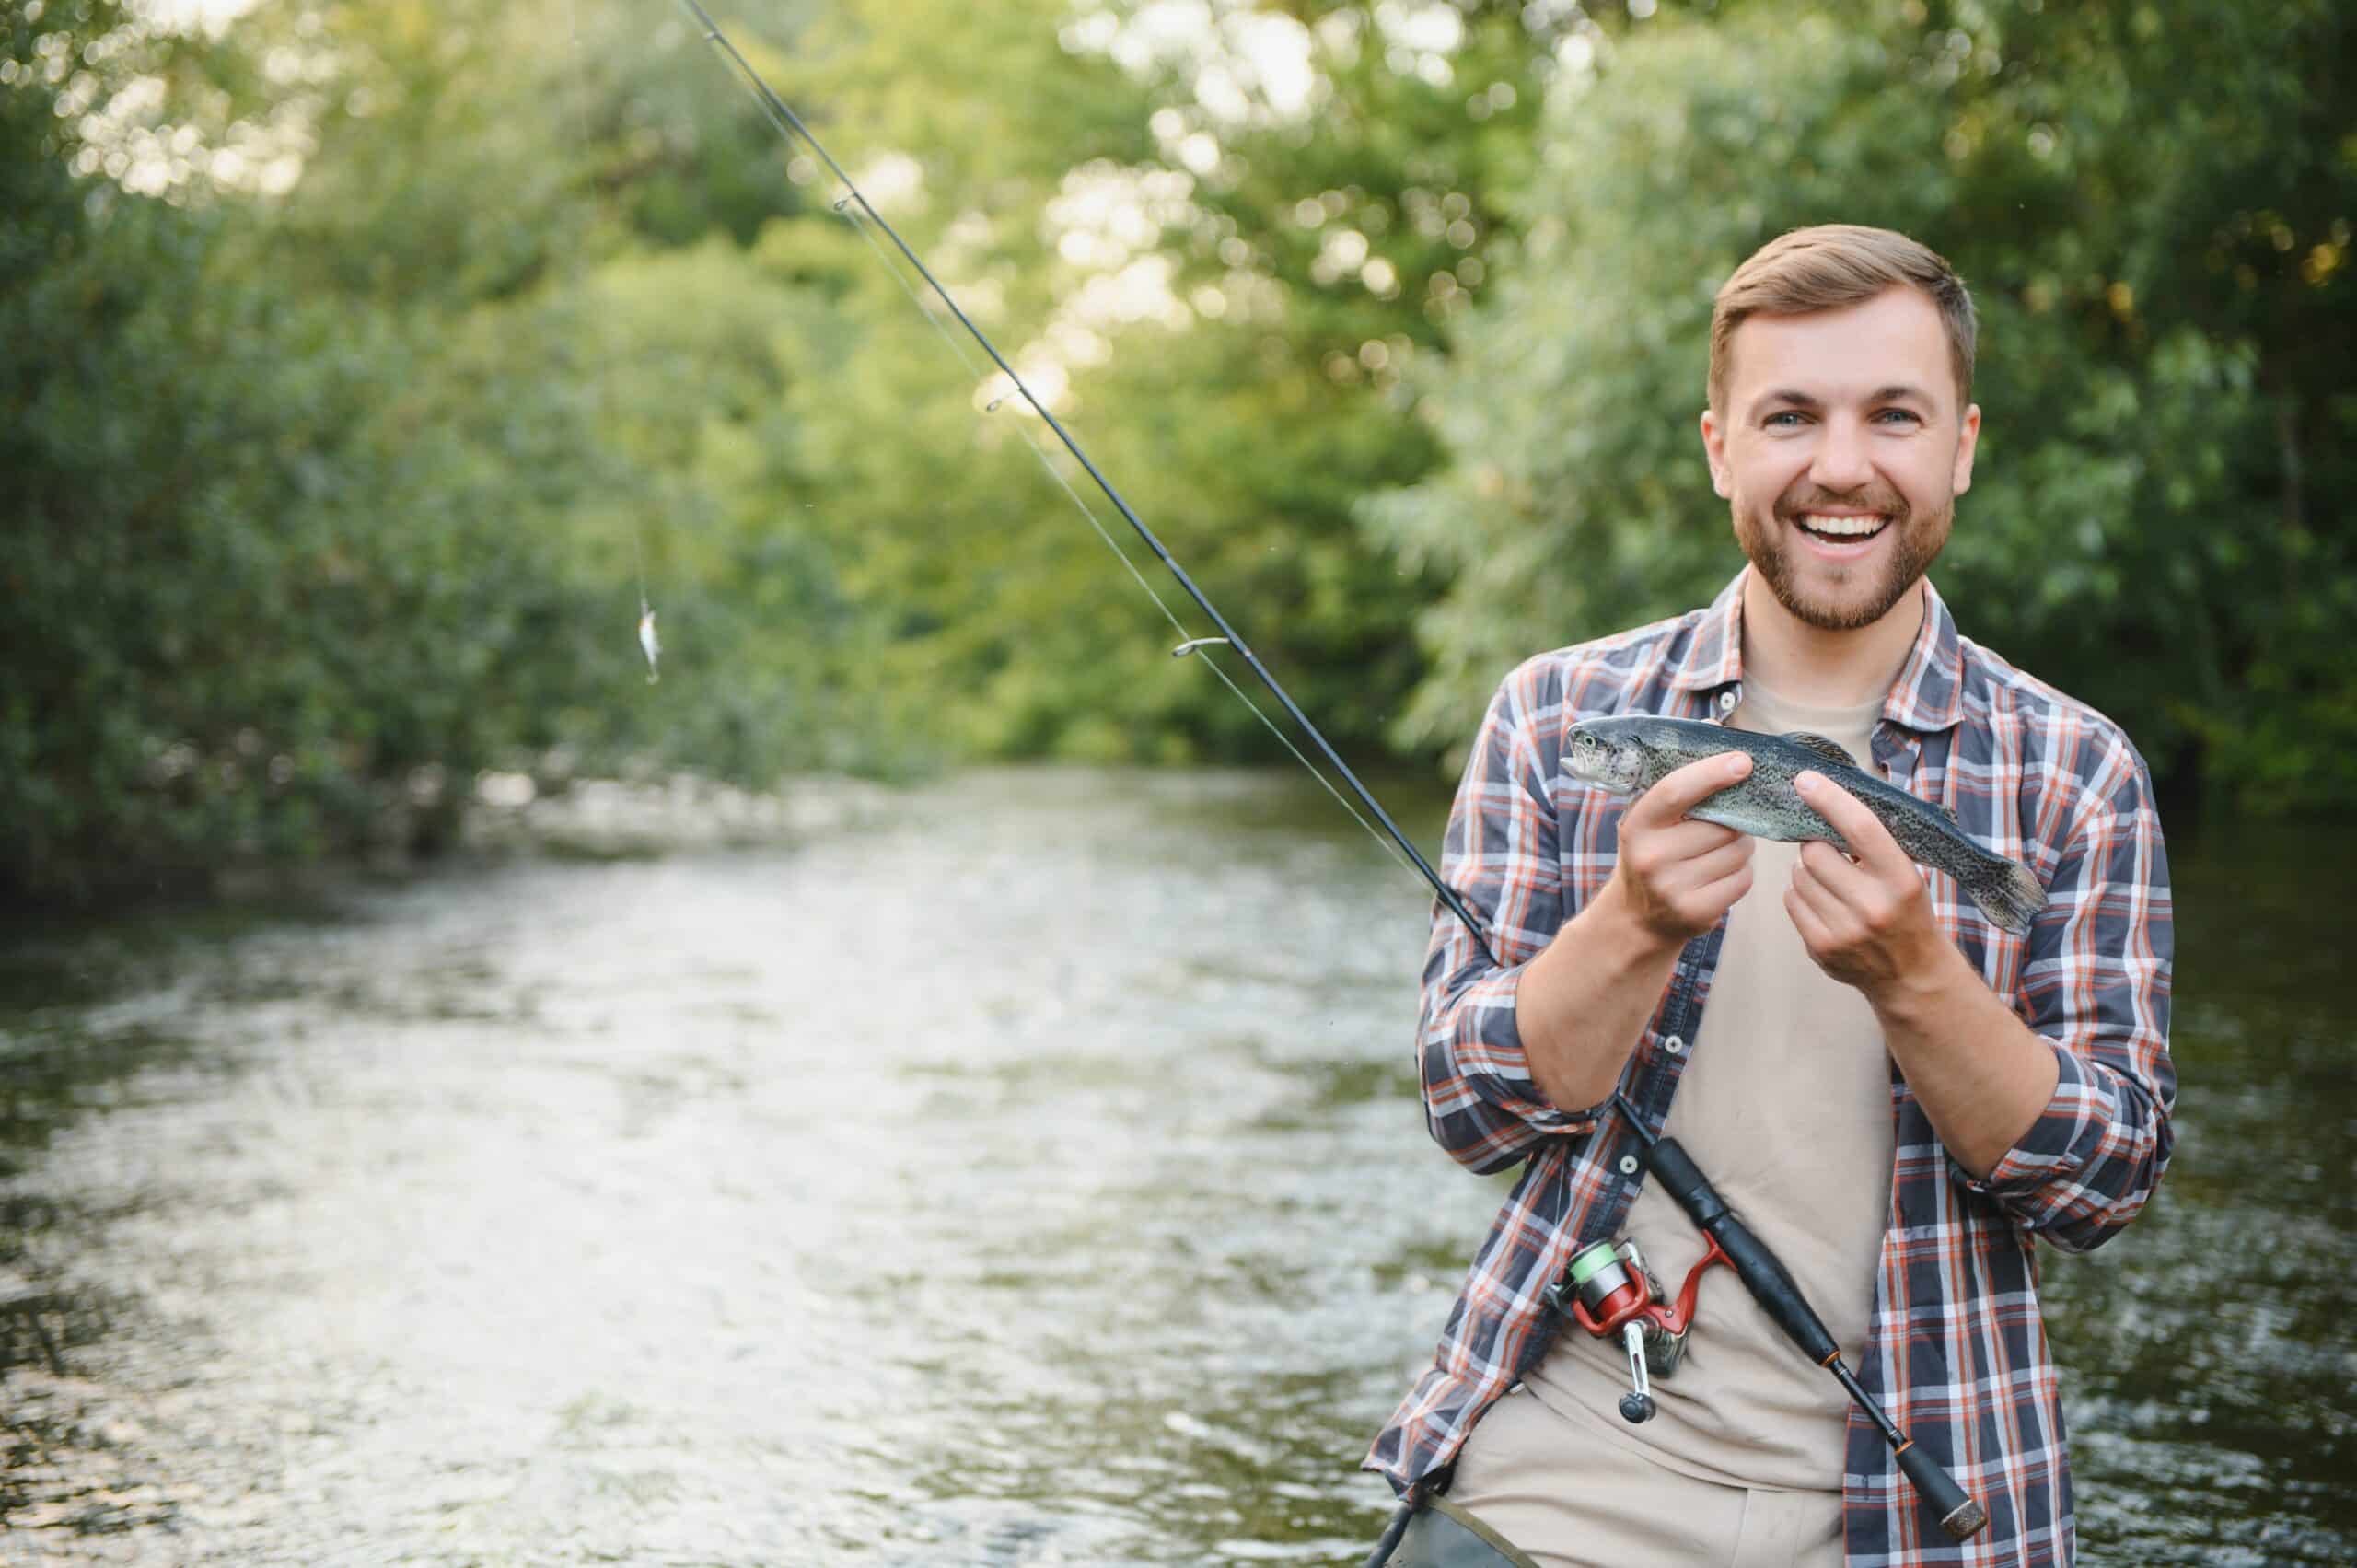 fanatic4fishing.com : Do trout like bait or lures?